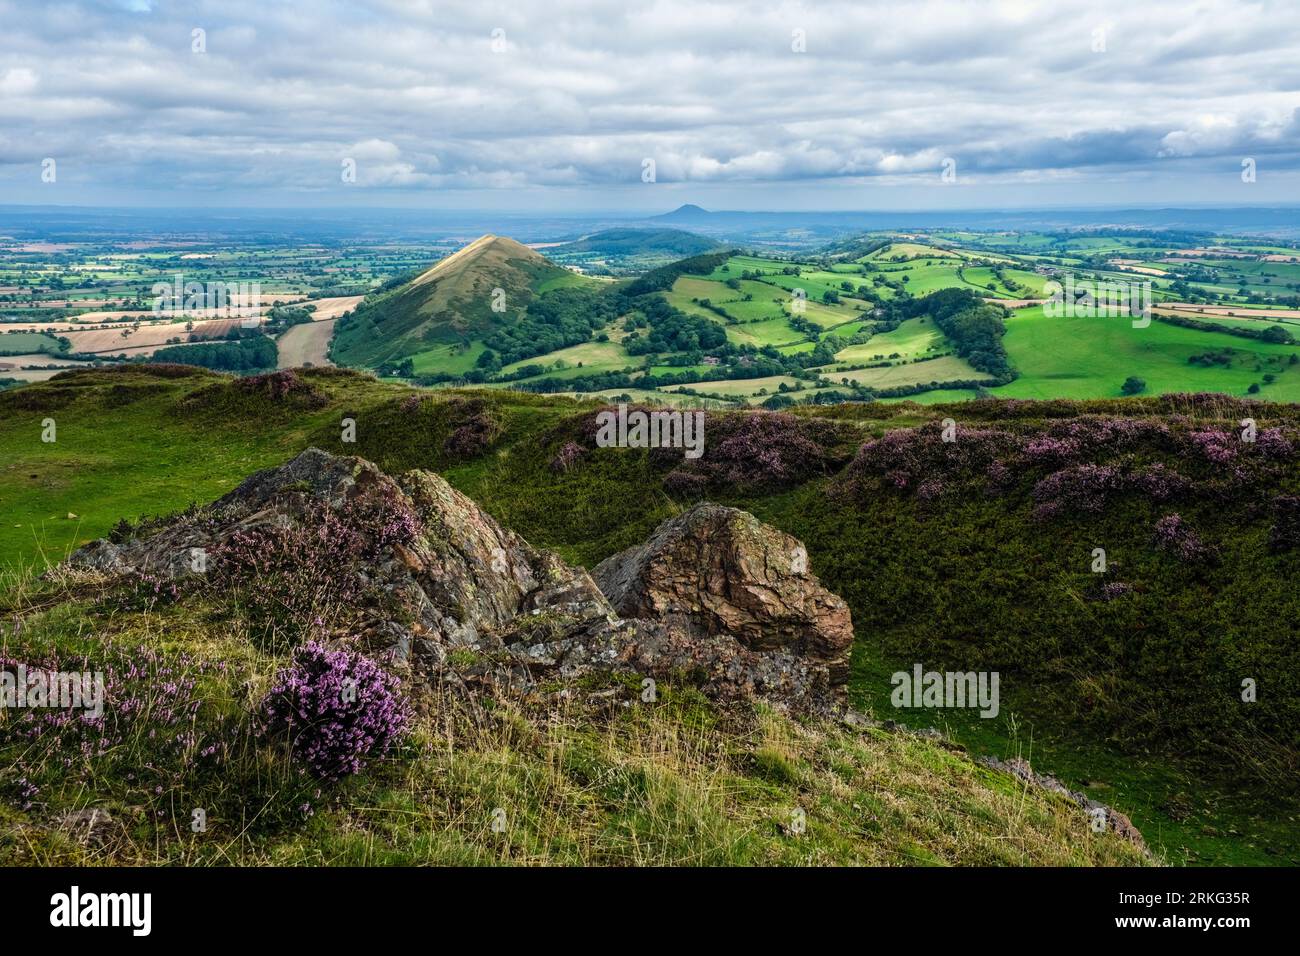 View from the ramparts on the summit of Caer Caradoc Hill looking towards The Lawley and The Wrekin, Shropshire Hills AONB, Shropshire, England Stock Photo